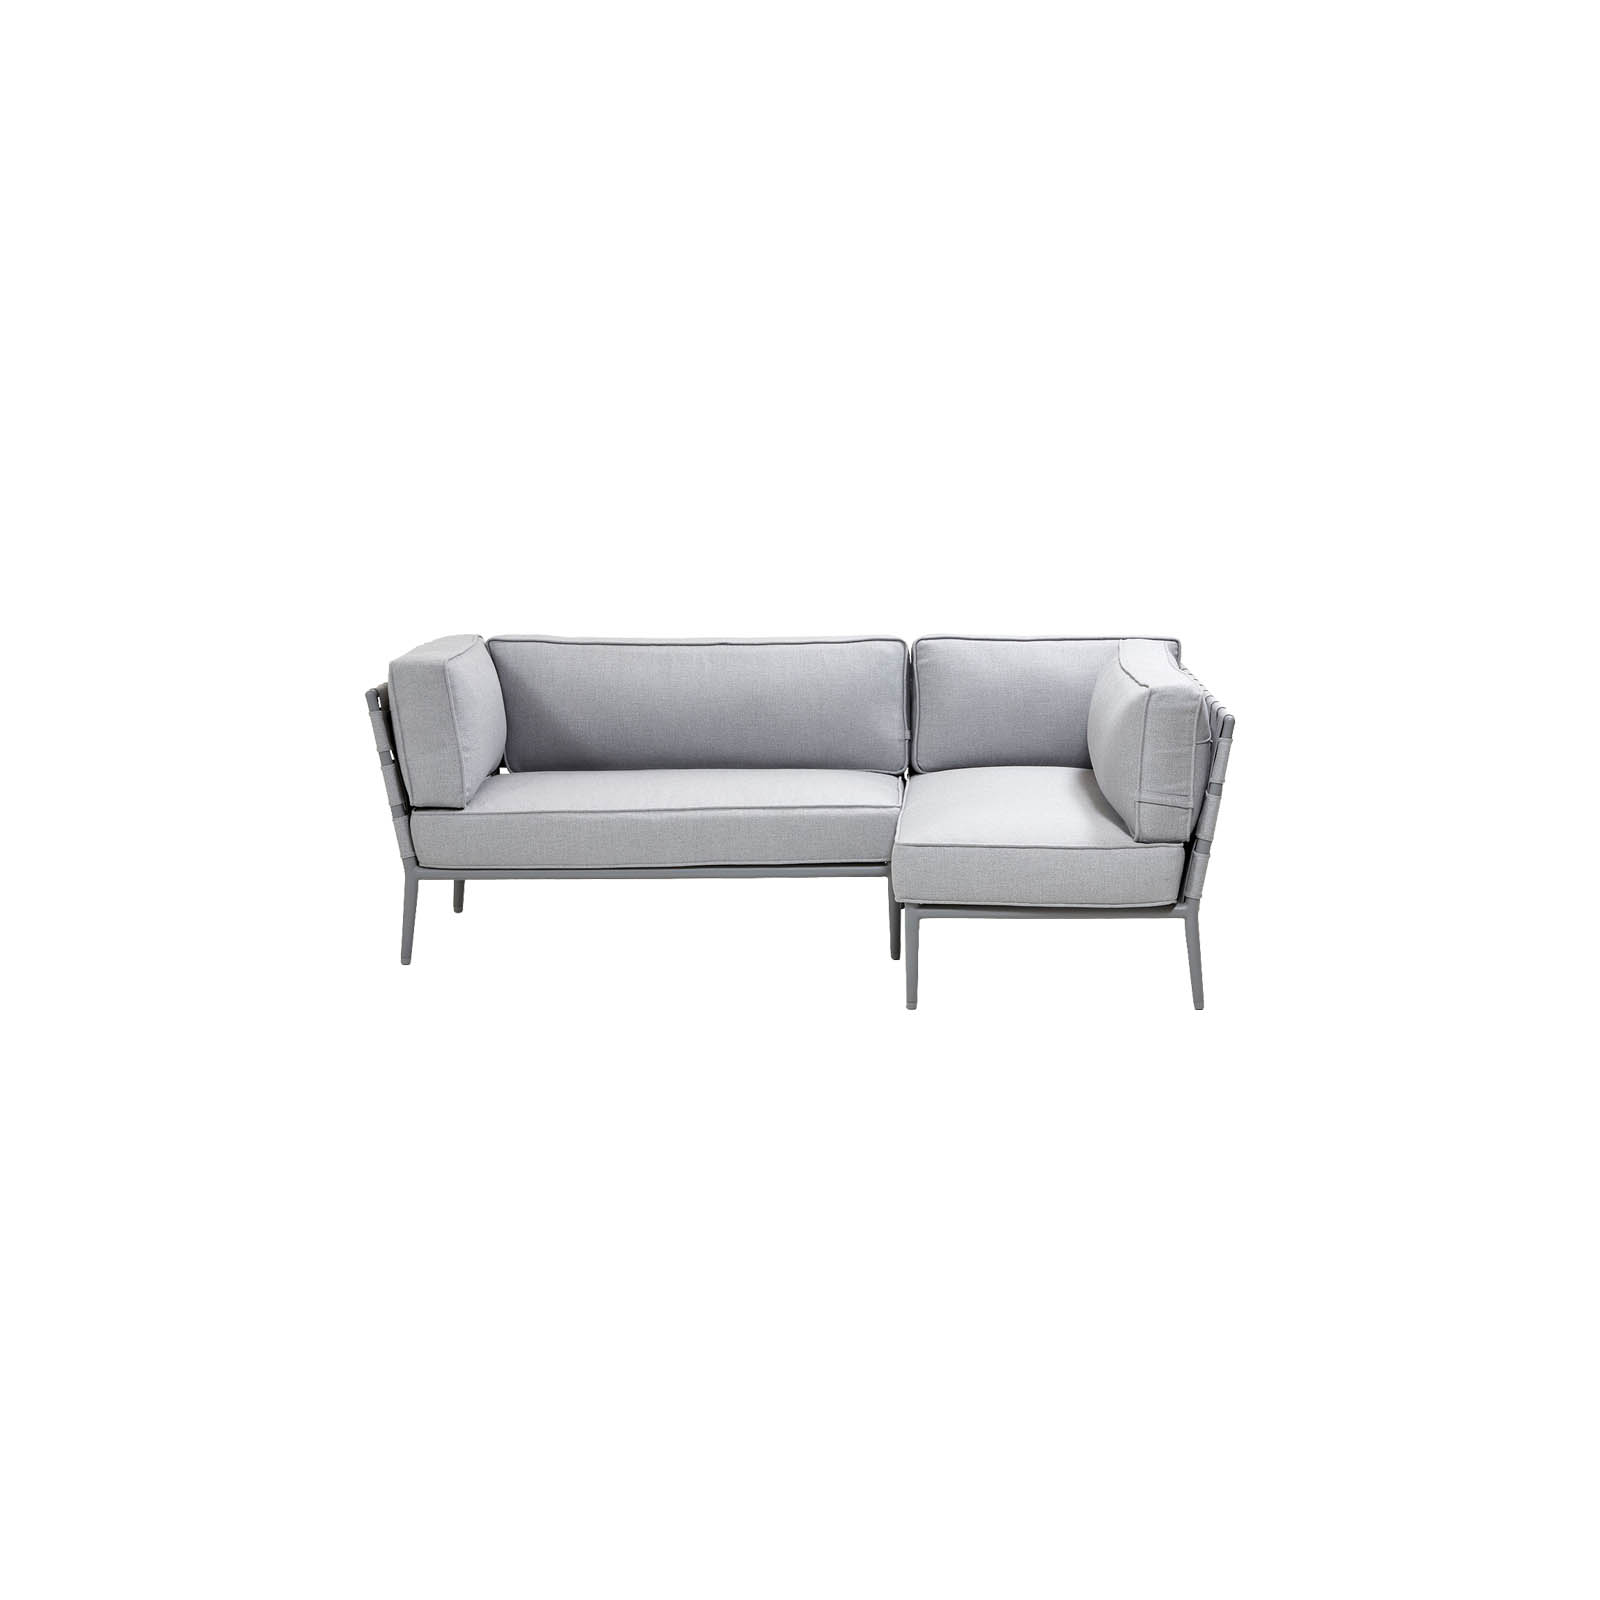 Conic Lounge 3 aus Cane-line AirTouch mit QuickDry in Light Grey